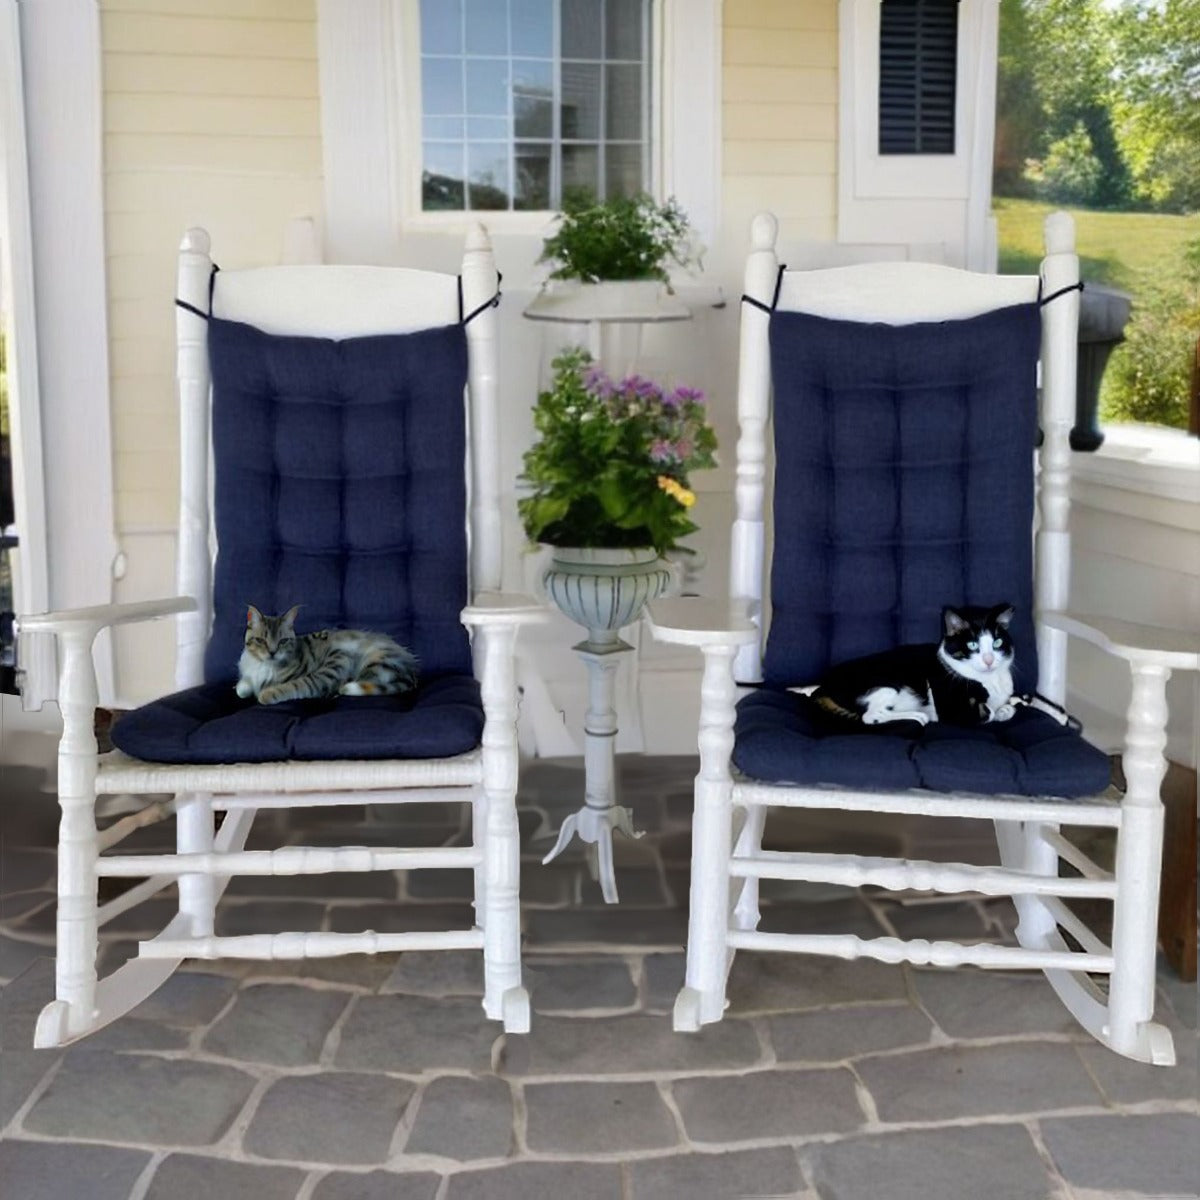 navy blue outdoor rocker cushions on white rocking chairs on the patio